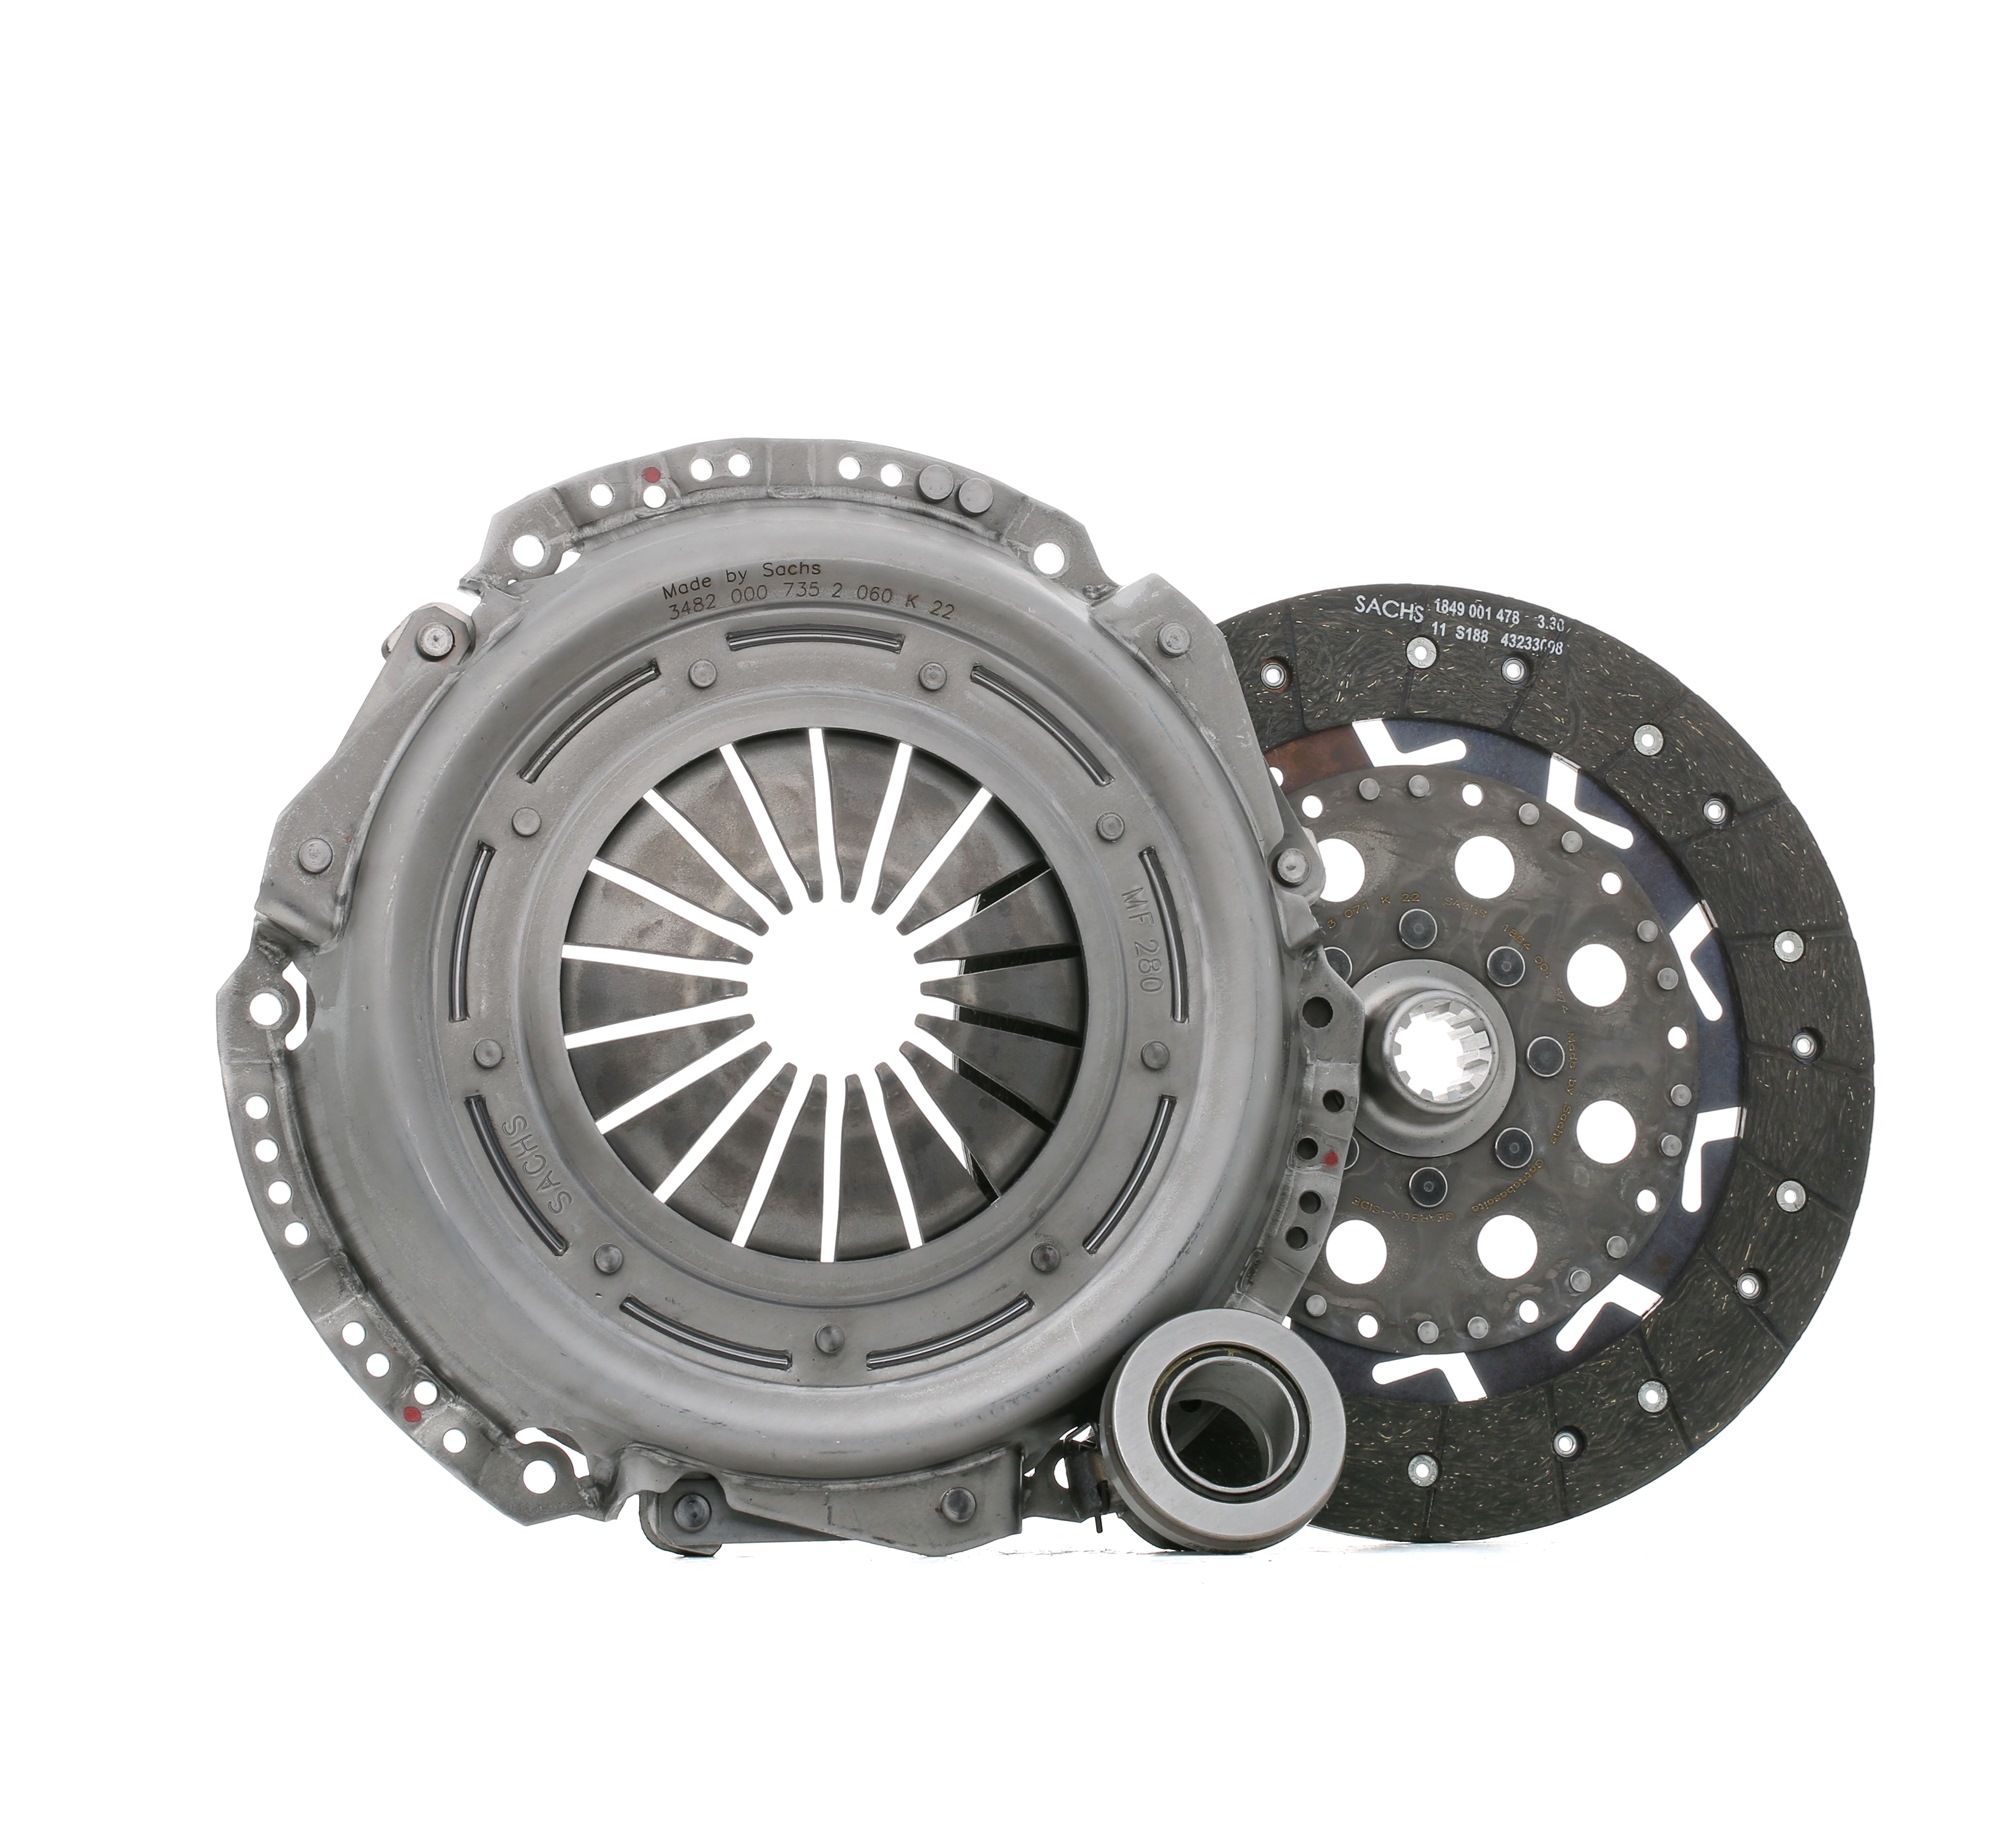 Clutch kit SACHS 3000 950 078 - Clutch spare parts for Jeep order